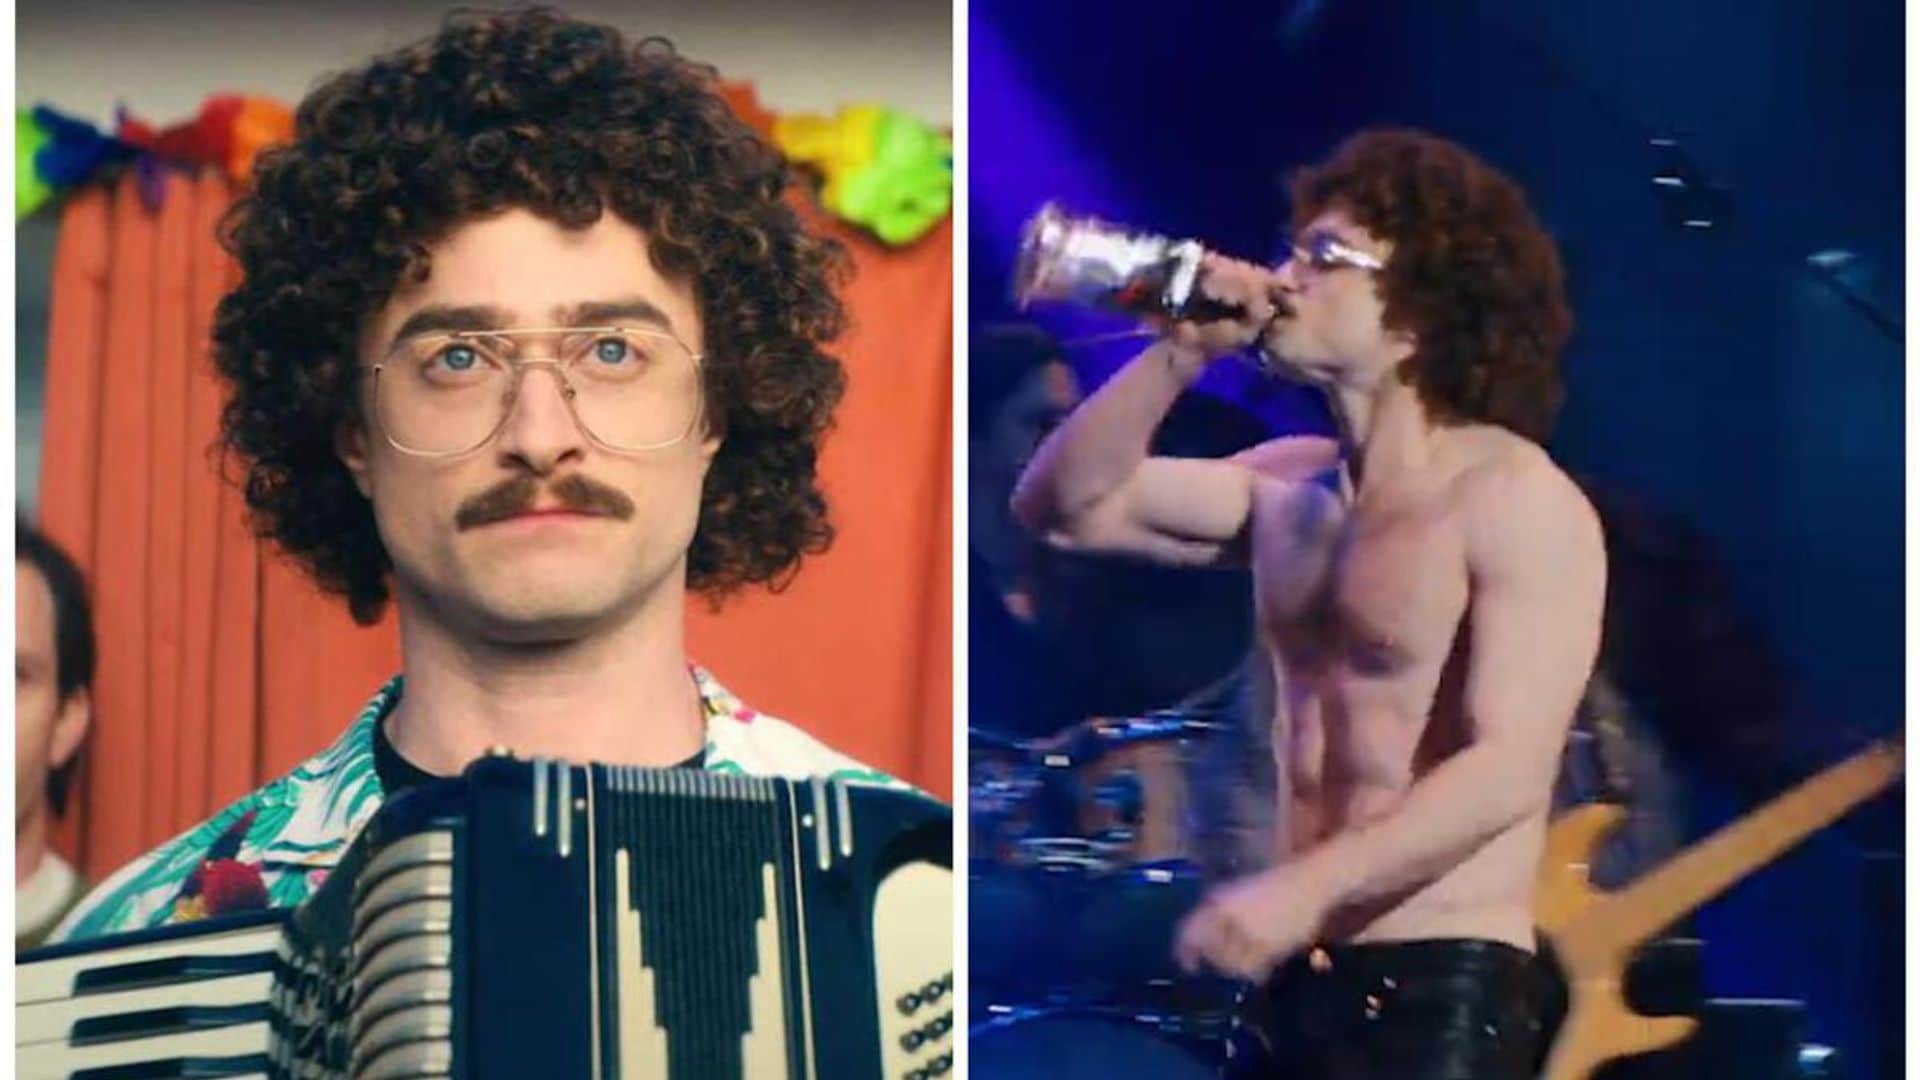 Daniel Radcliffe shows off his ripped abs in ‘Weird: The Al Yankovic Story’ teaser